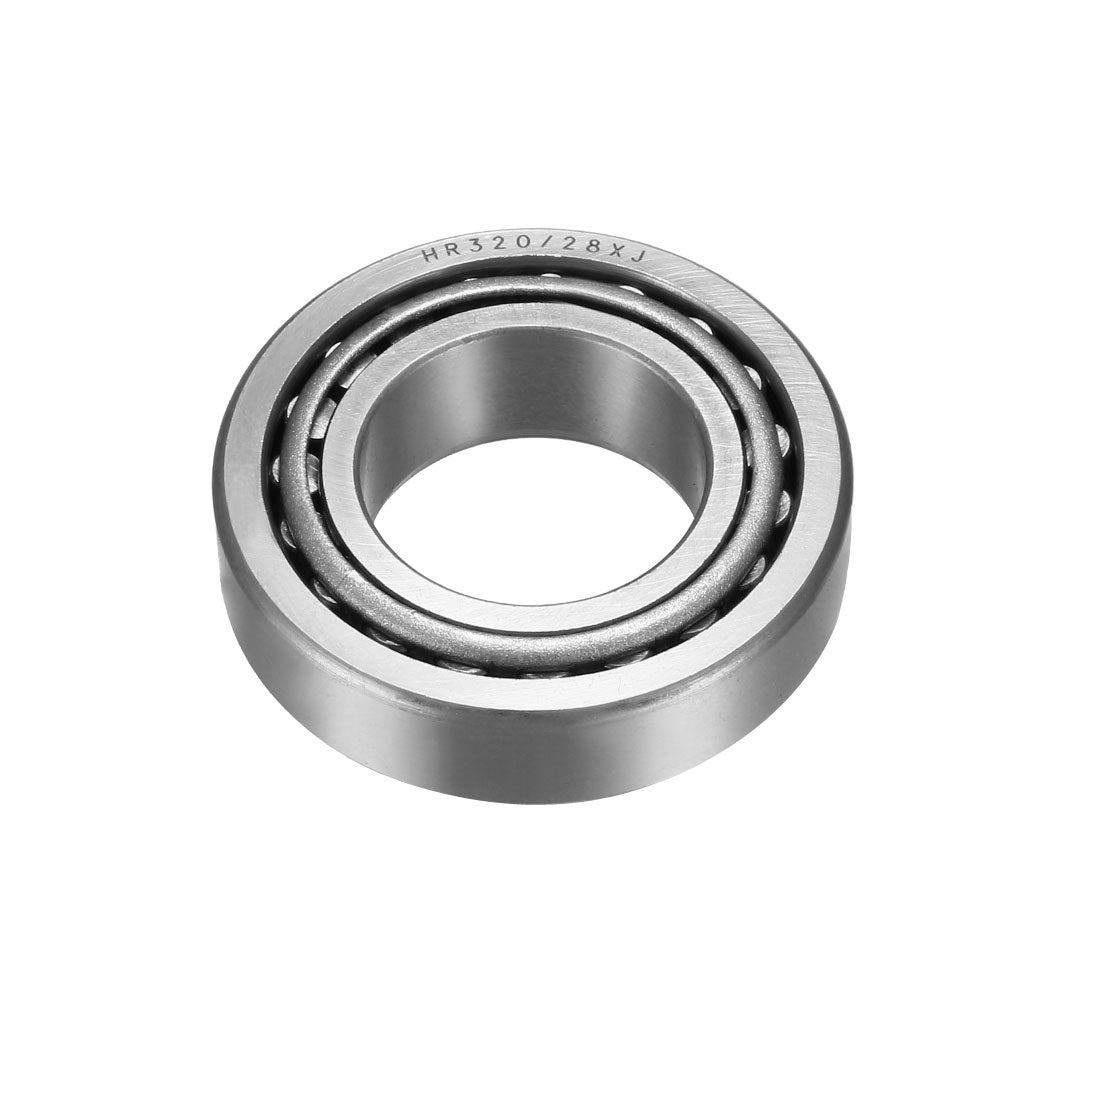 uxcell Uxcell HR320/28XJ Tapered Roller Bearing Cone and Cup Set 28mm Bore 52mm O.D.